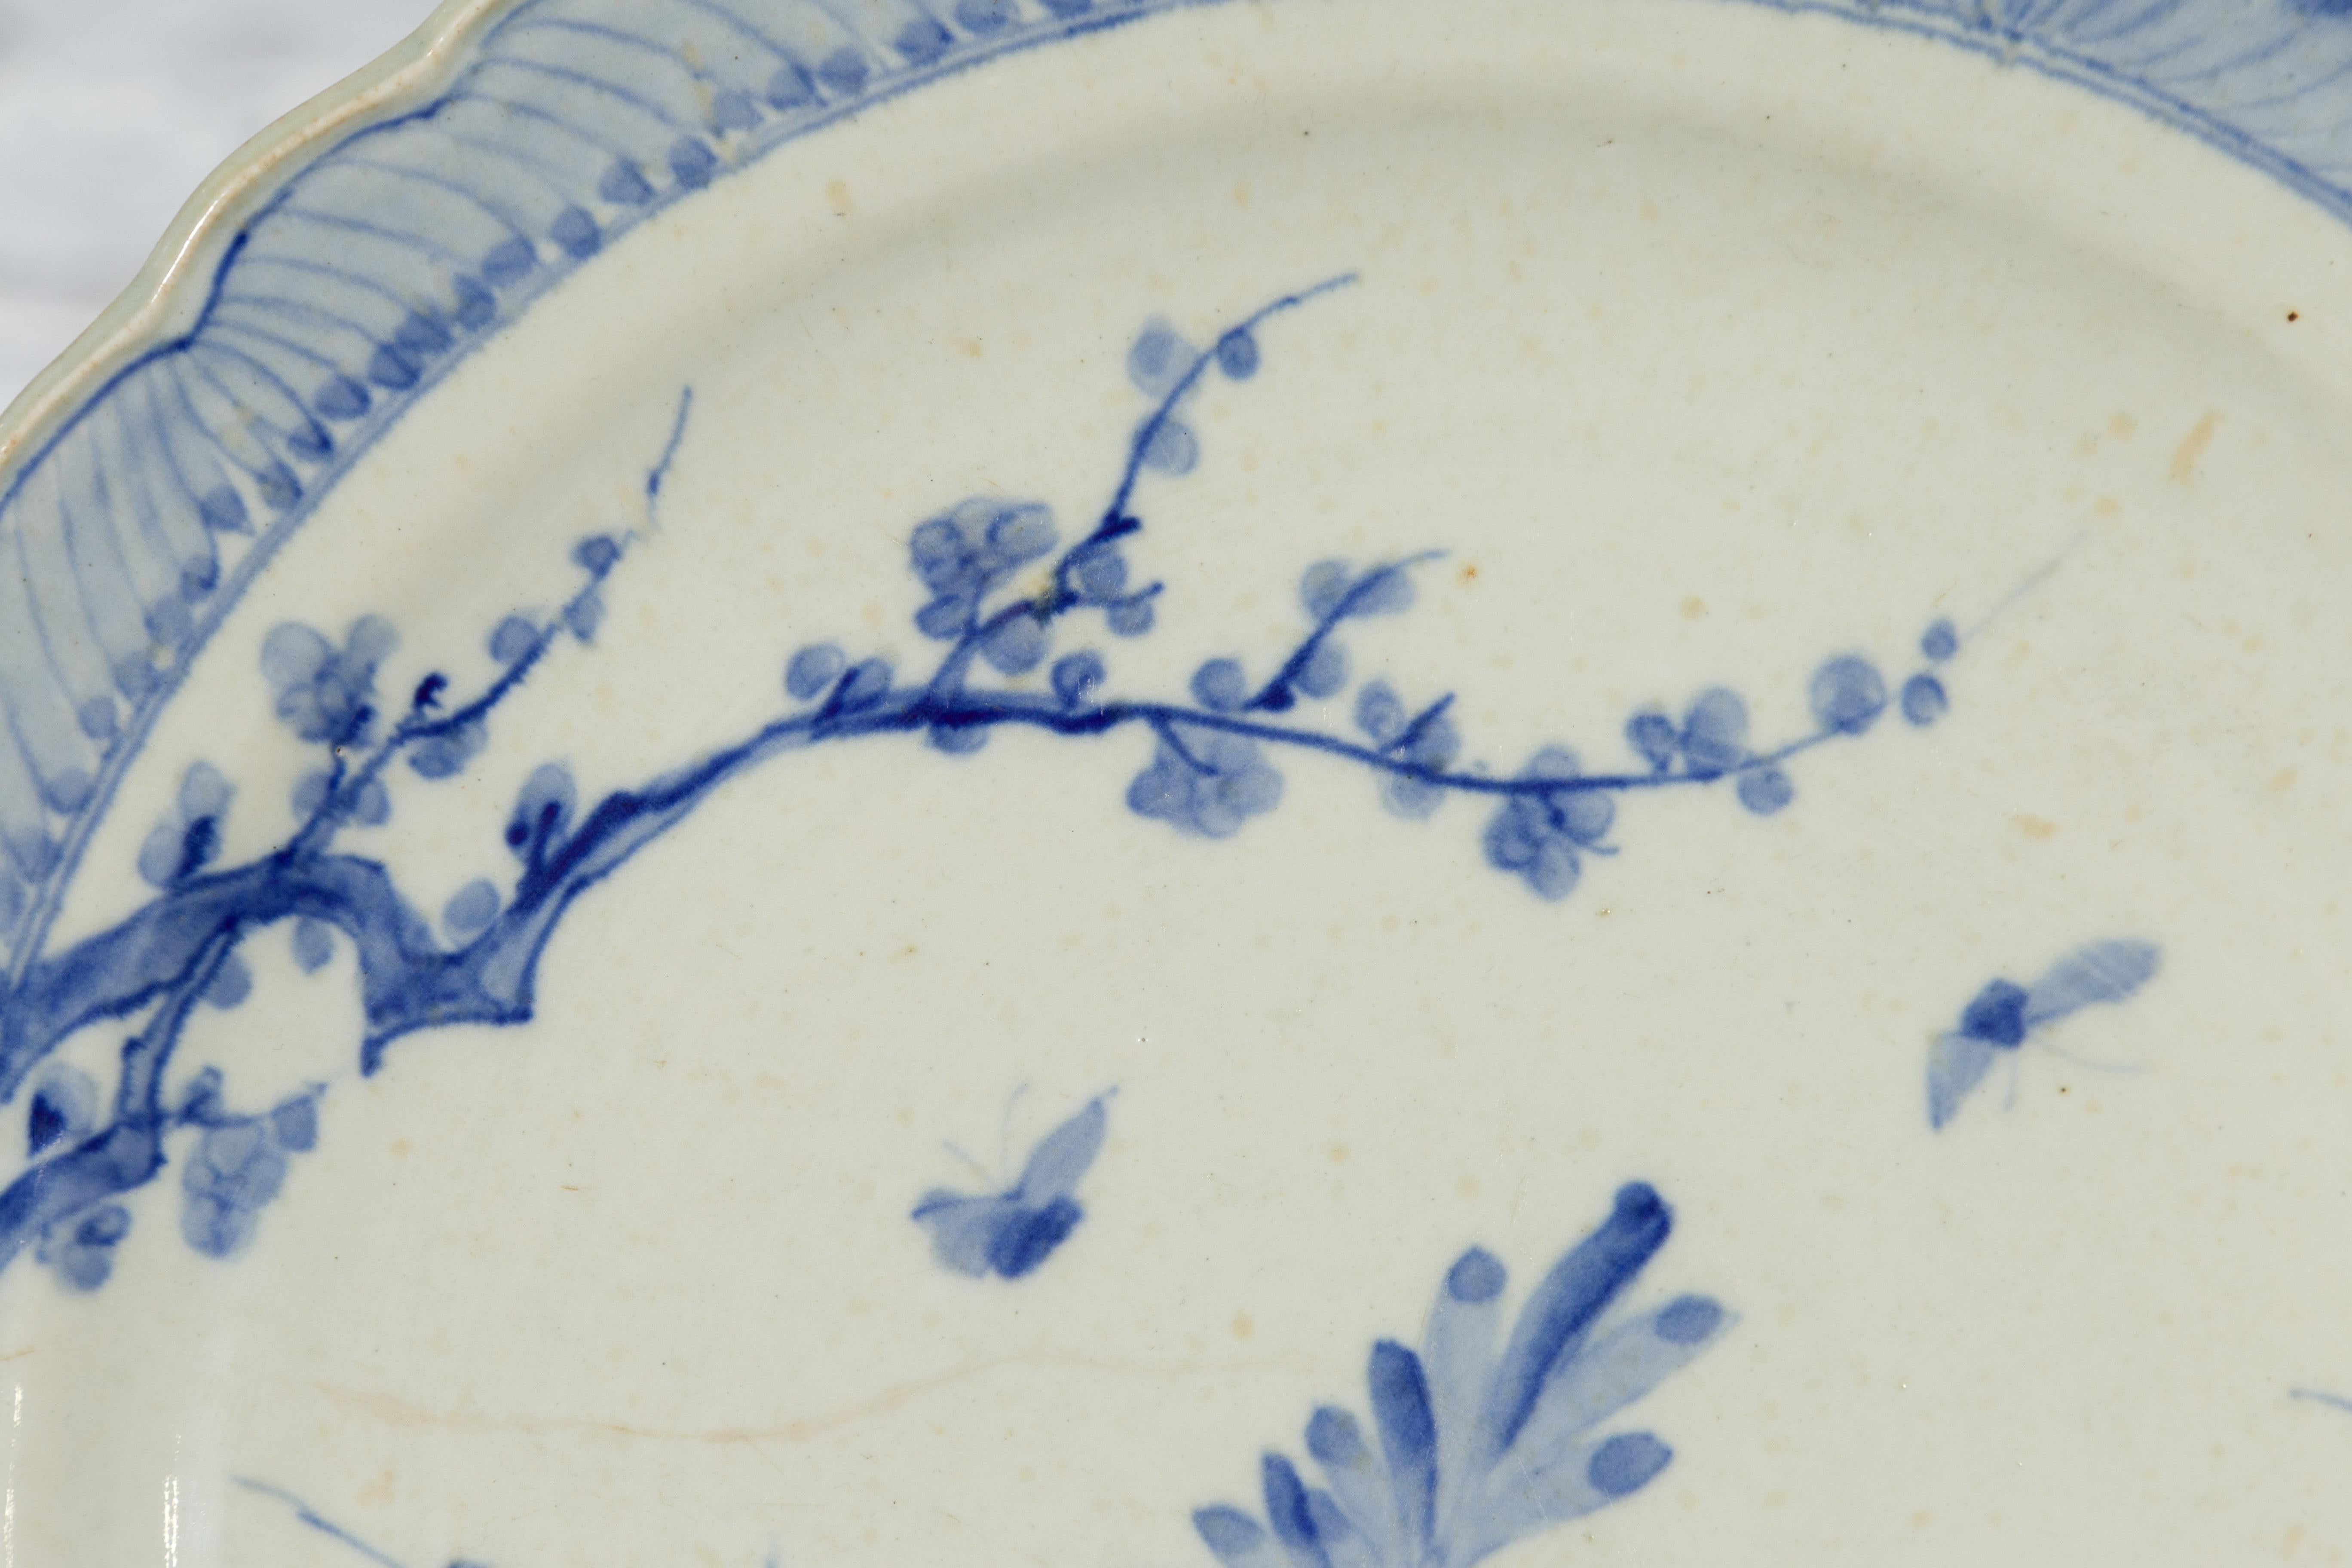 Japanese Blue and White Hand-Painted Porcelain Charger Plate with Foliage Décor For Sale 12